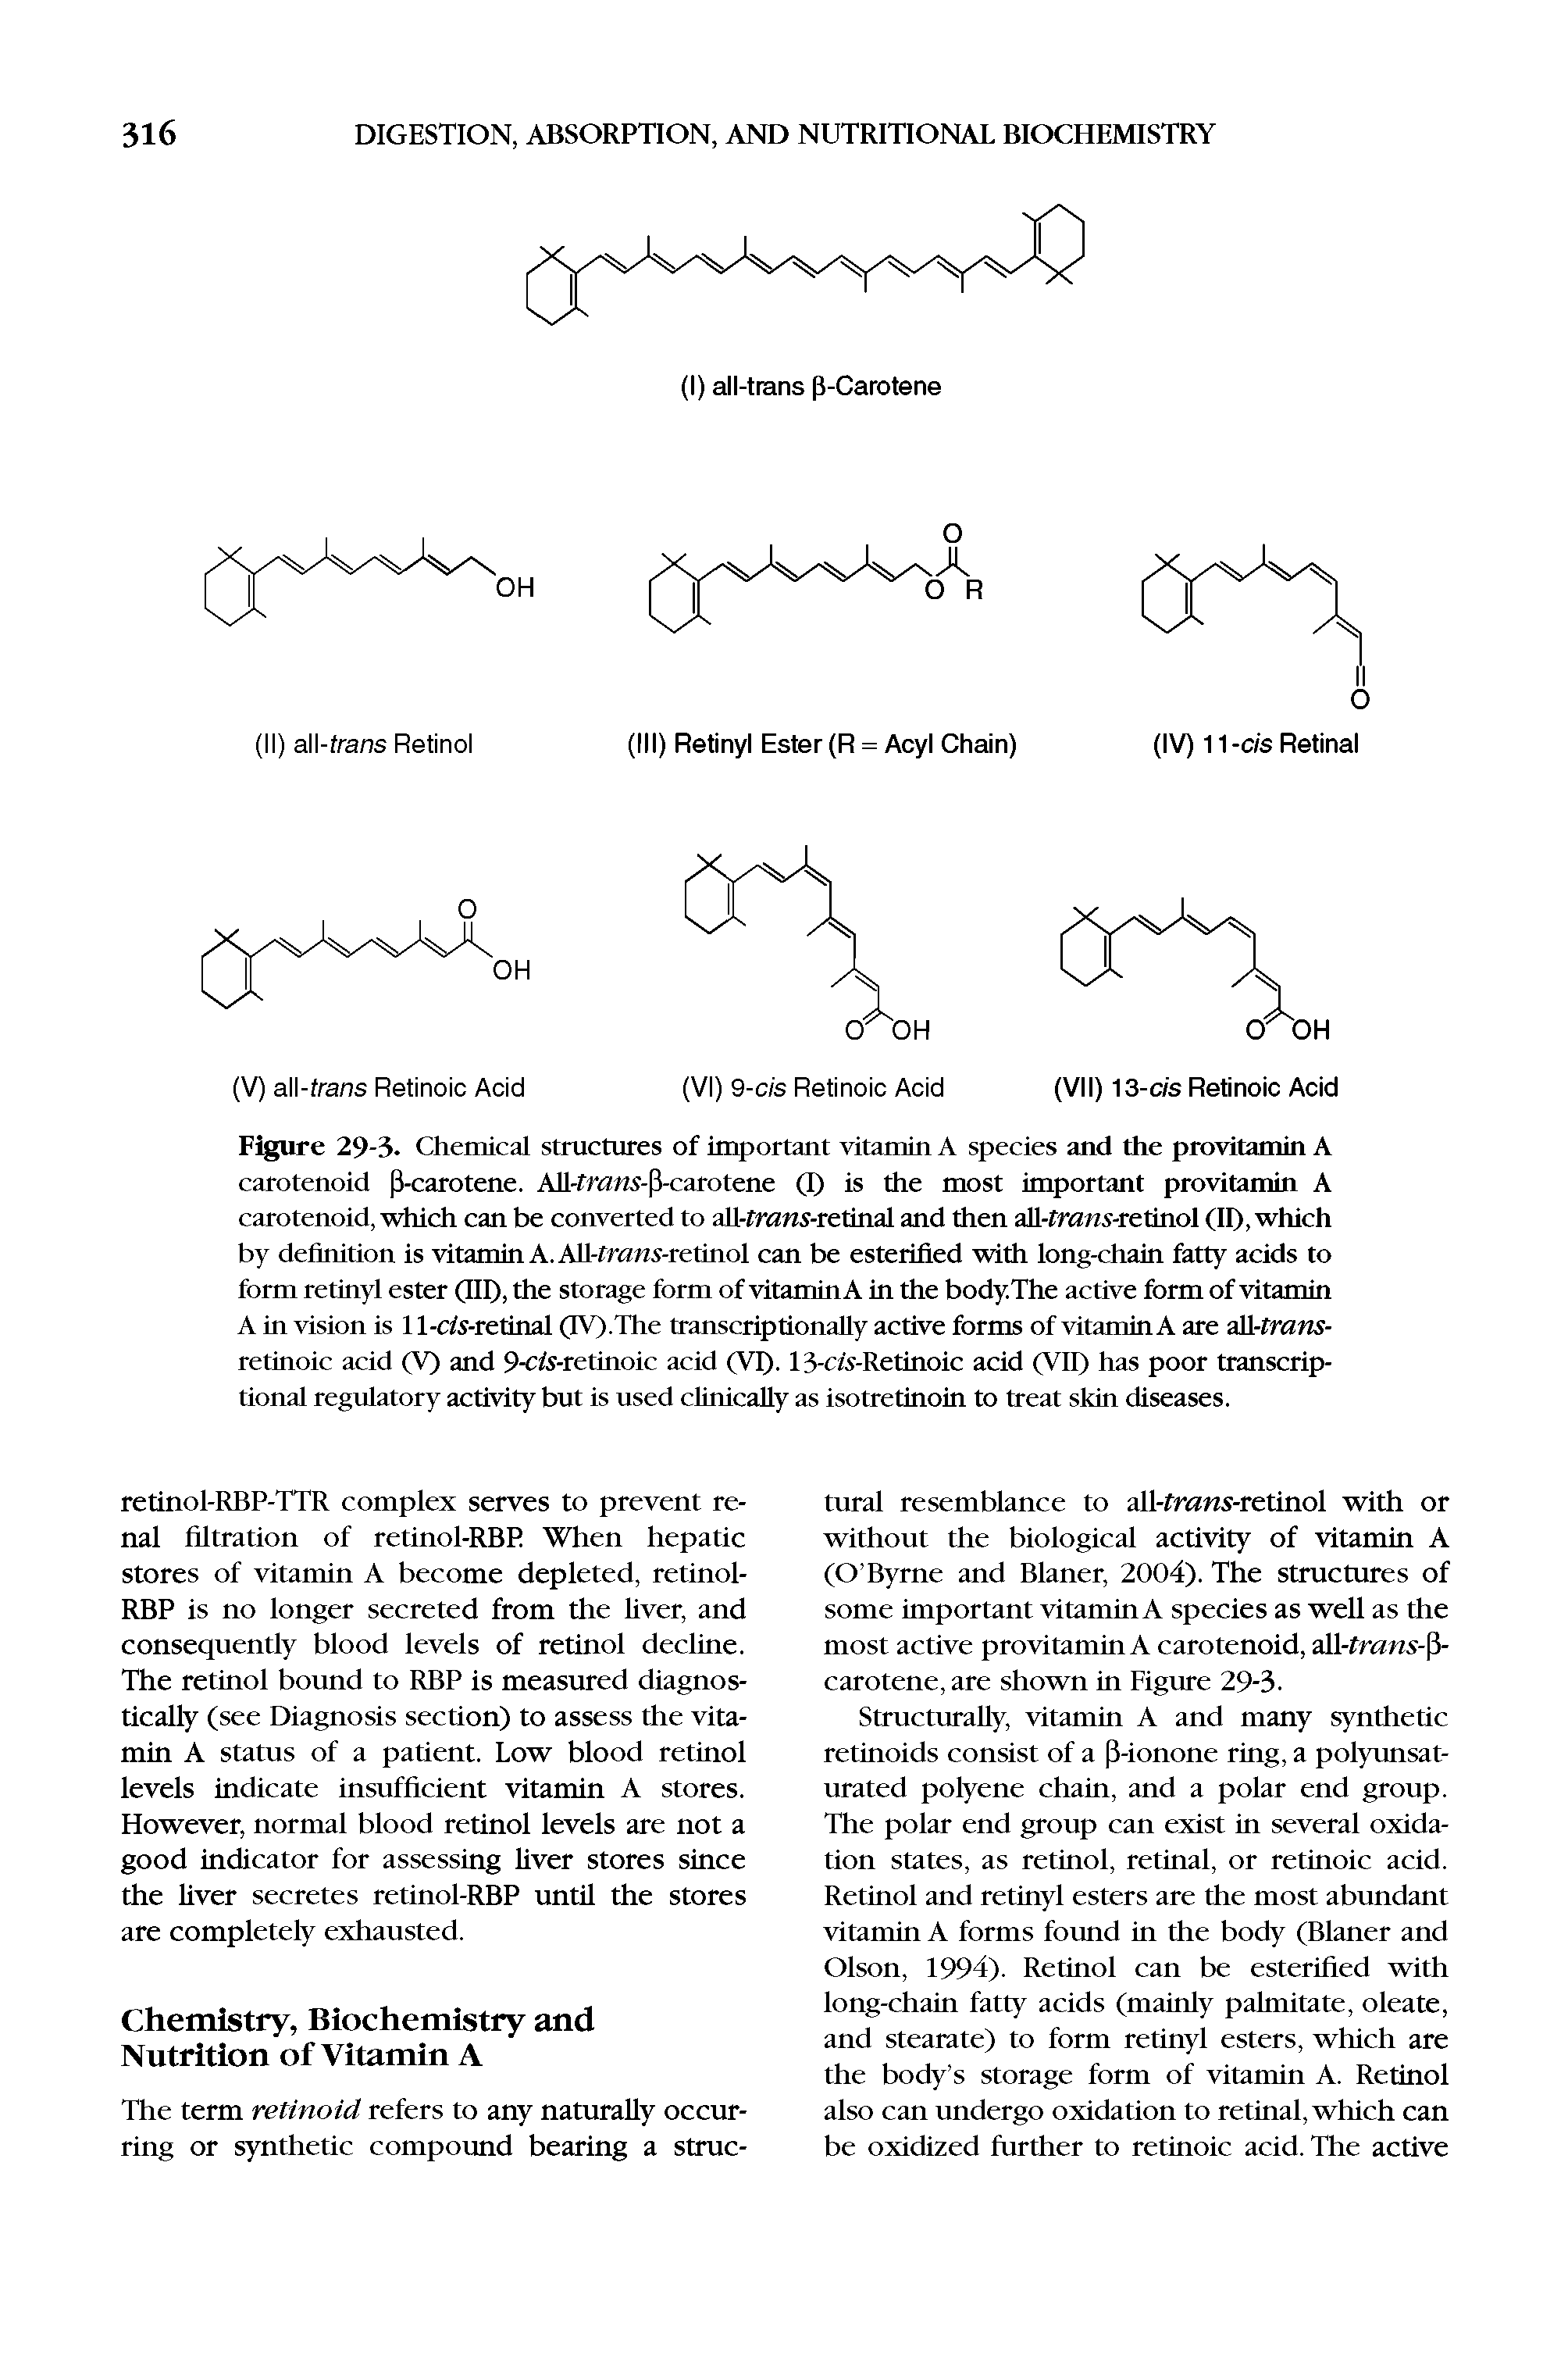 Figure 29-3. Chemical structures of important vitamin A species and the provitamin A carotenoid i-carotene. All-fra/w-fi-carolene (T) is the most important provitamin A carotenoid, which can be converted to all-fraws-retinal and then all-tram-retinol (If), which by definition is vitamin A. All-tram-retinol can be esterified with long-chain fatty acids to form retinyl ester (III), the storage form of vitaminA in the body.The active form of vitamin A in vision is 11-cts-retinal (TV).The transcriptionally active forms of vitaminA are all-tram-retinoic acid (V) and 9-cts-retinoic acid (VI). 13-cA-Retinoic acid (VII) has poor transcriptional regulatory activity but is used clinically as isotretinoin to treat skin diseases.